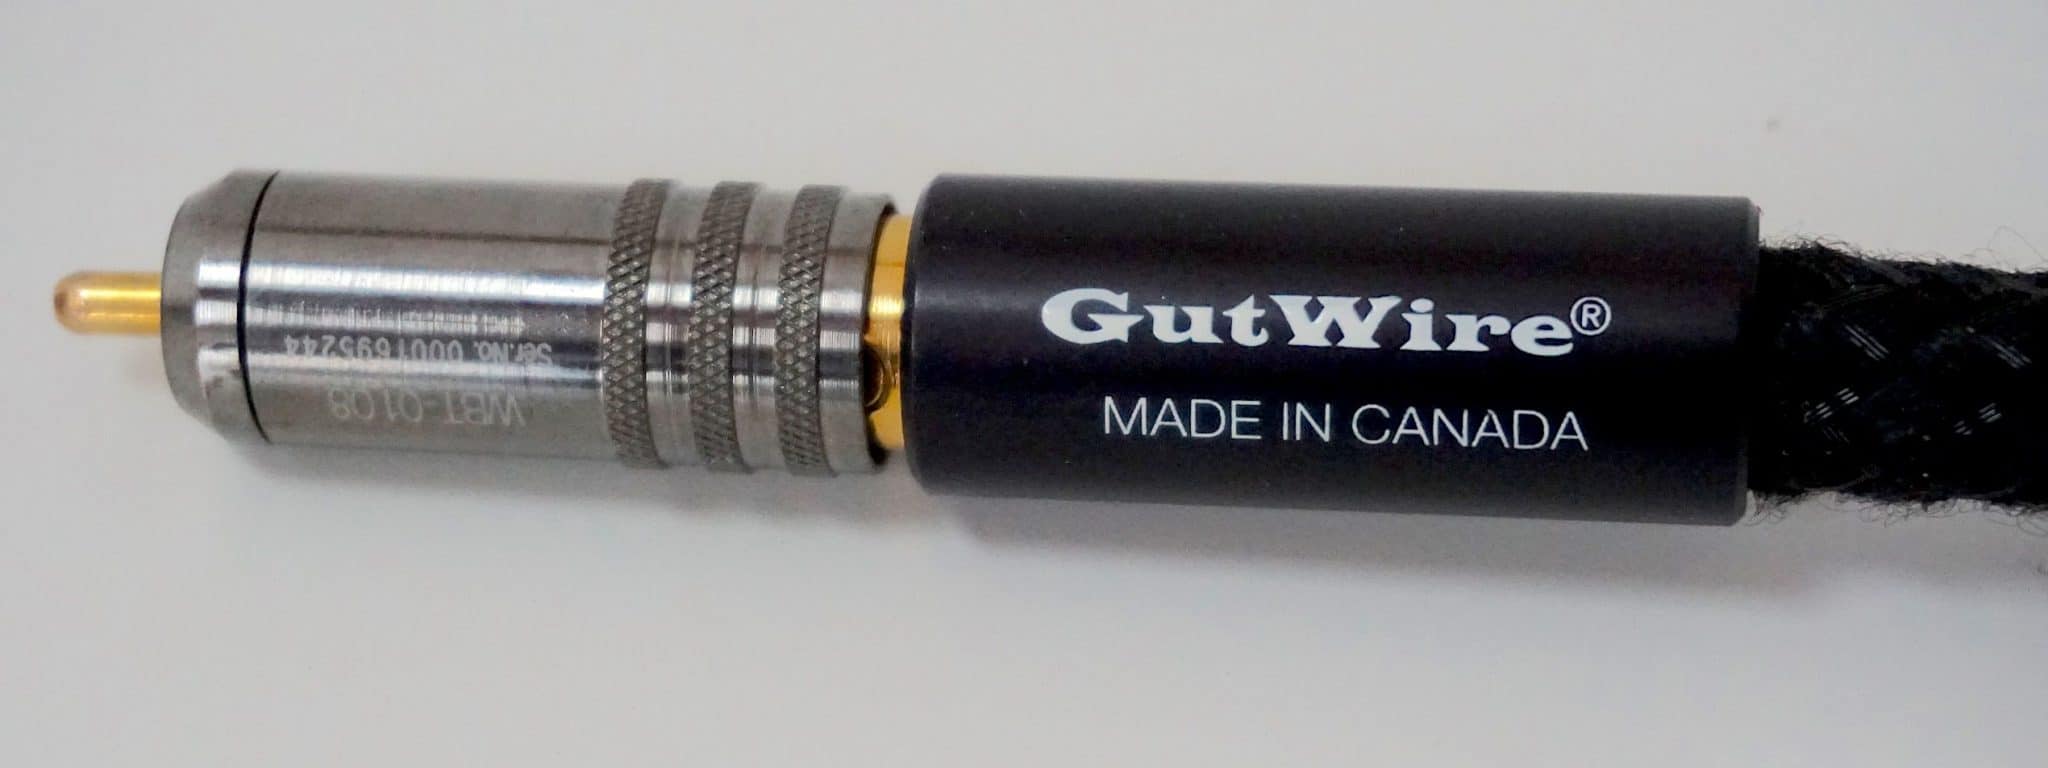 Consummate Ground cable from Gutwire